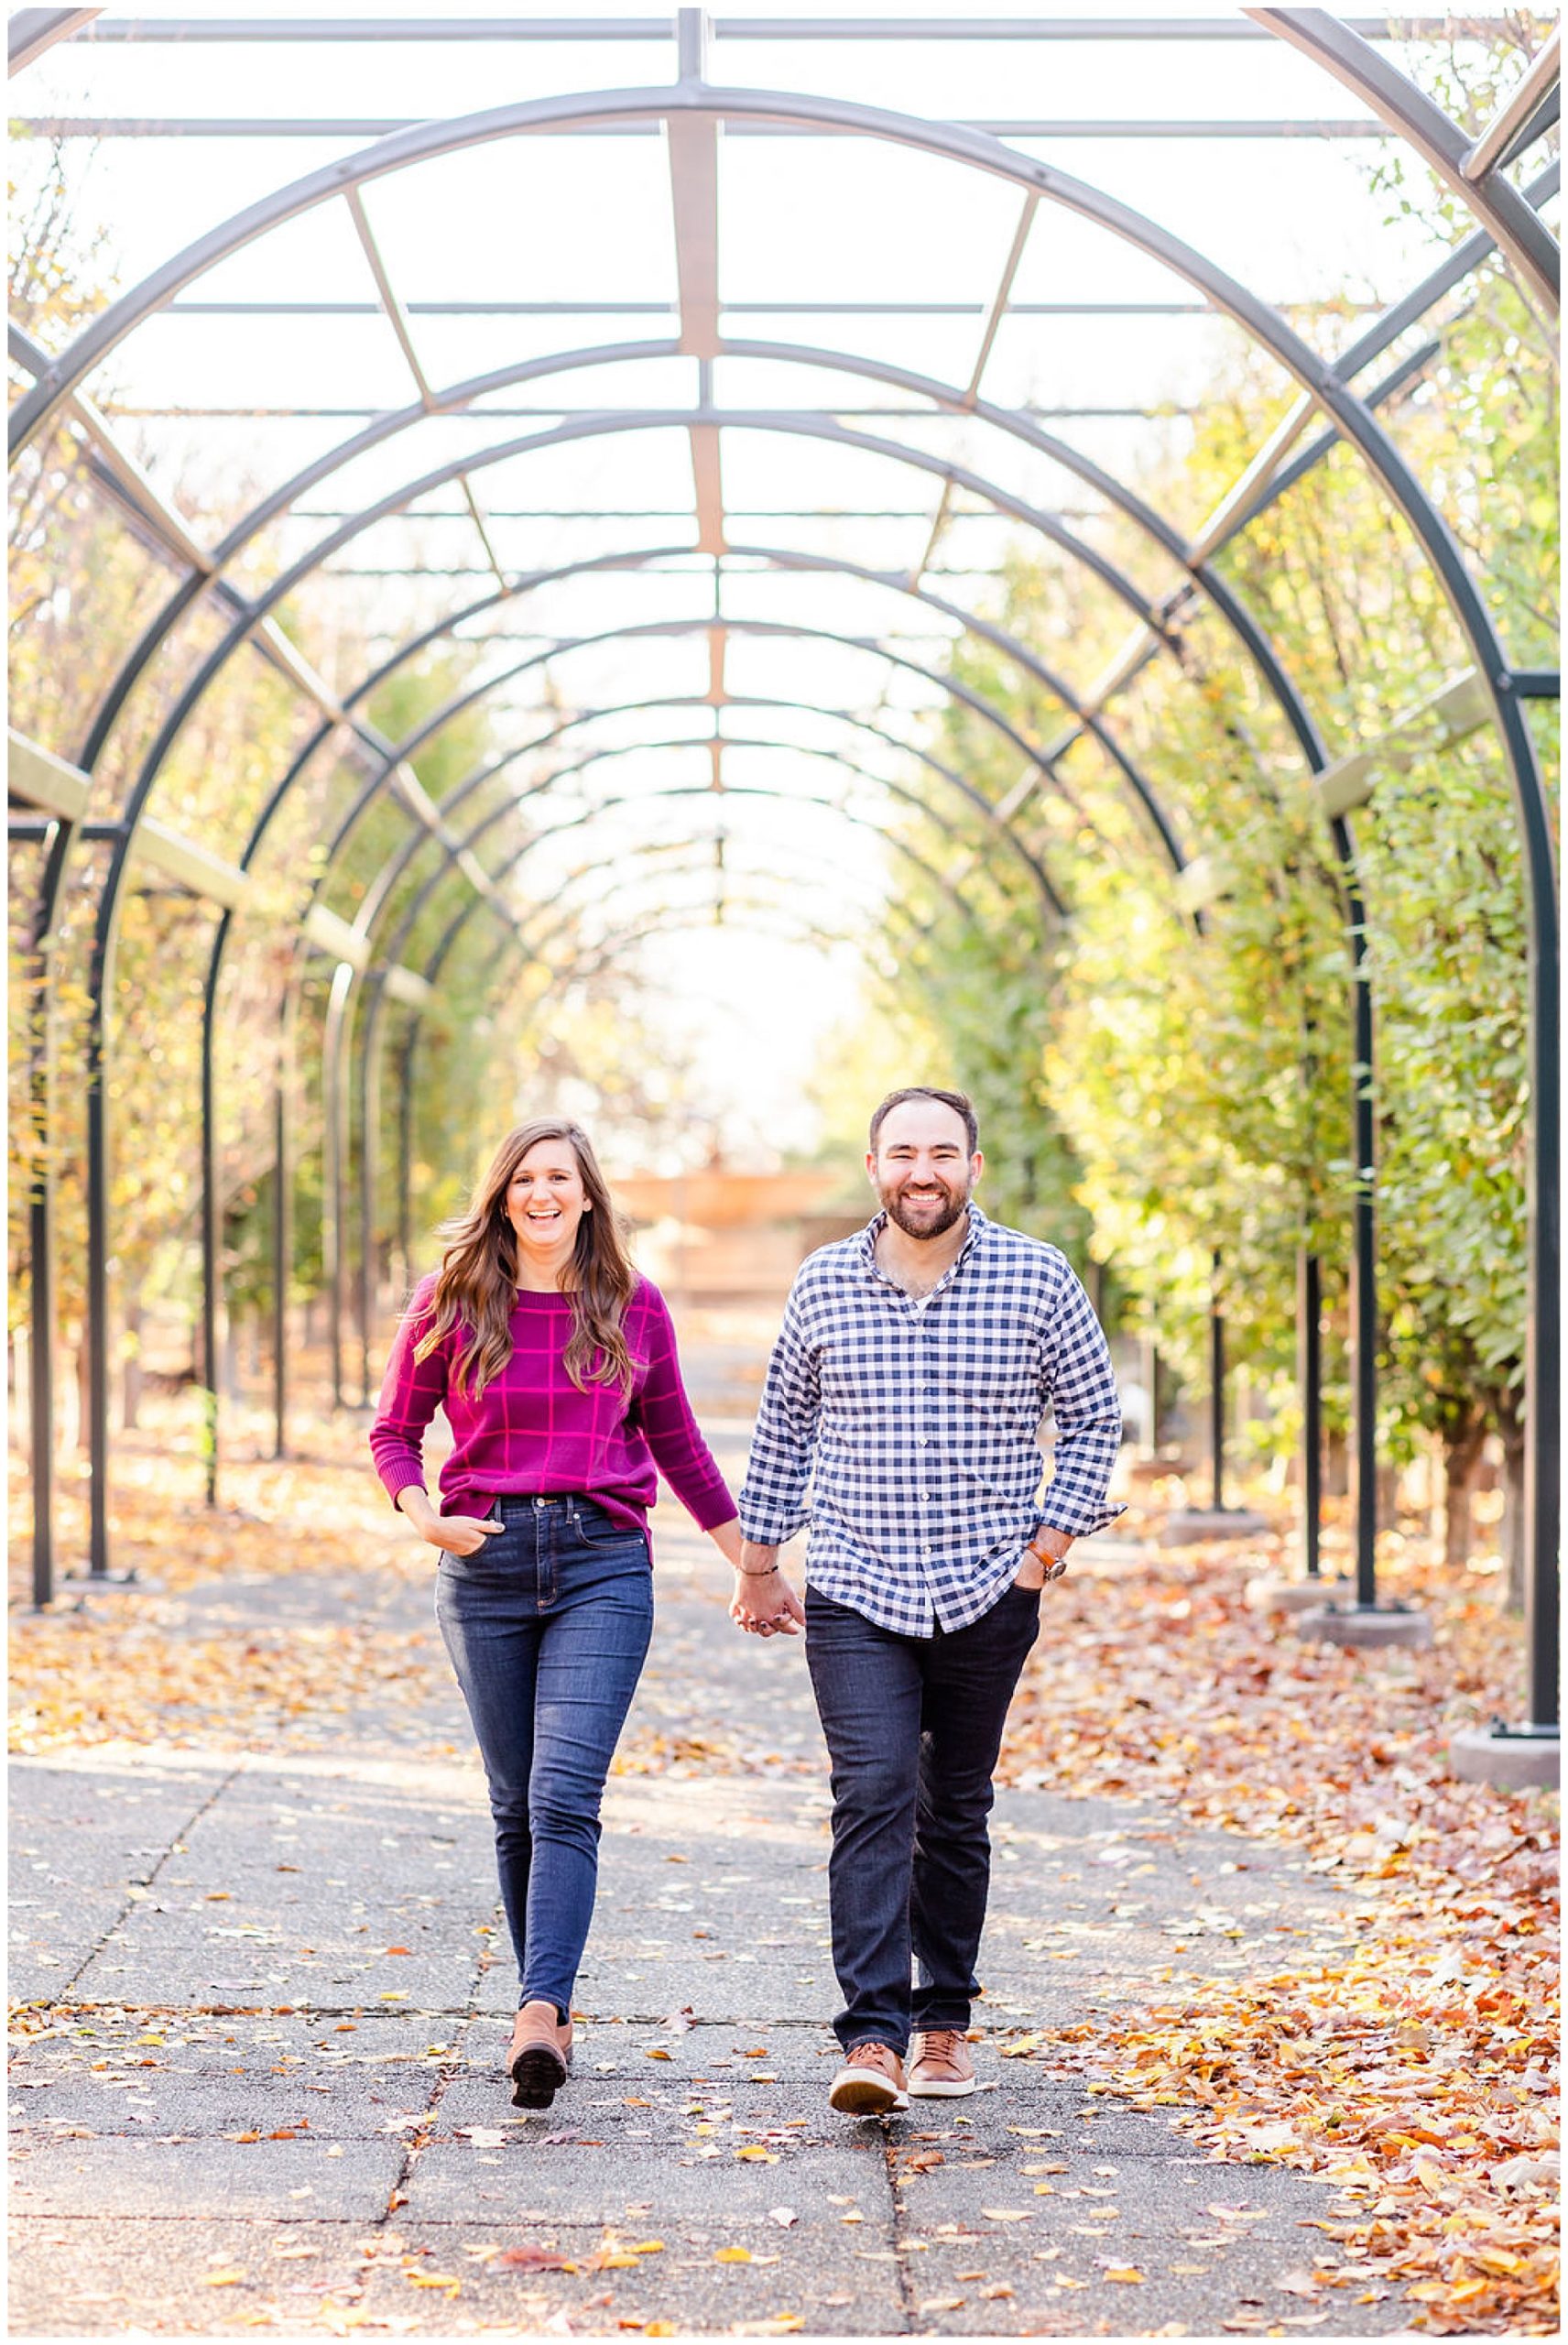 Meridian Hill Park engagement session, Meridian Hill Park DC, DC engagement photography, DC engagement photos, DC engagement session, DC engagement photographer, DC proposal photographer, DC wedding photographer, autumn engagement photos, Rachel E.H. Photography, couple holding hands, couple walking under archway, metal archway